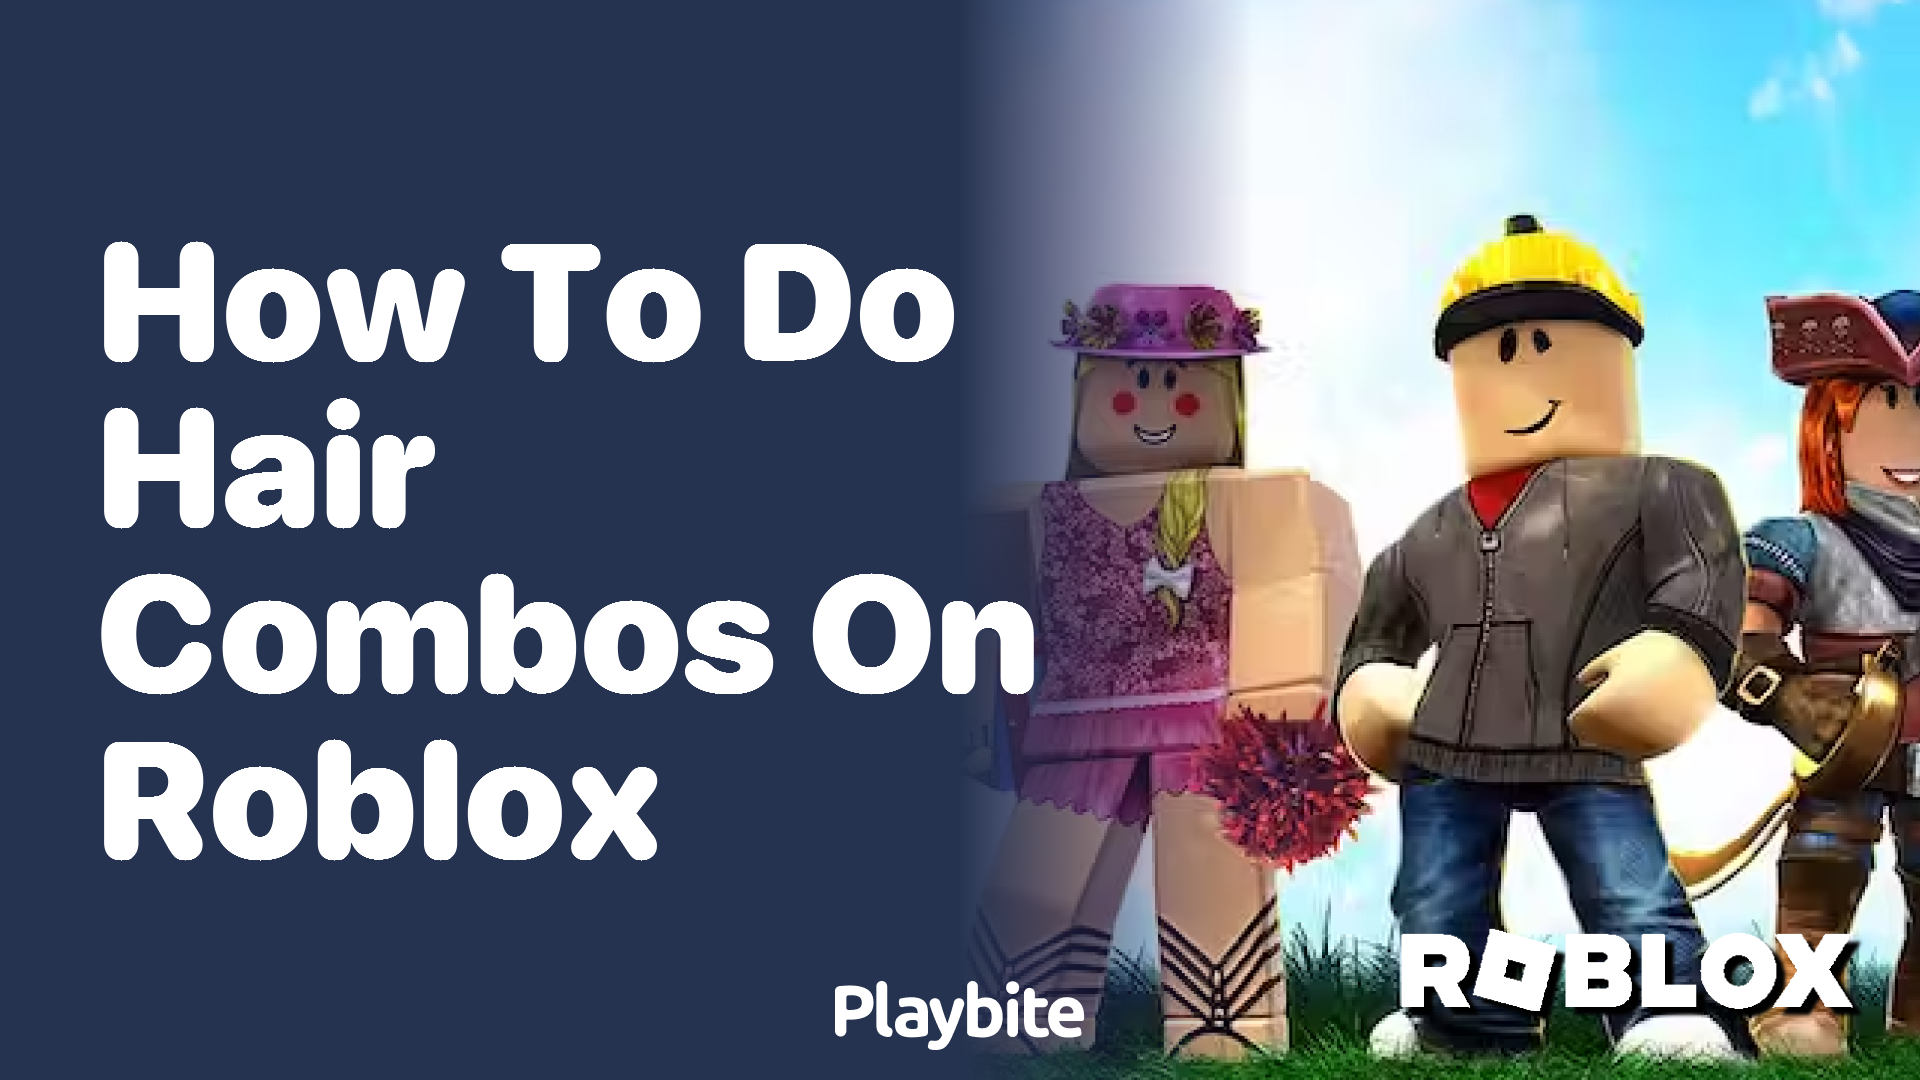 How to Do Hair Combos on Roblox